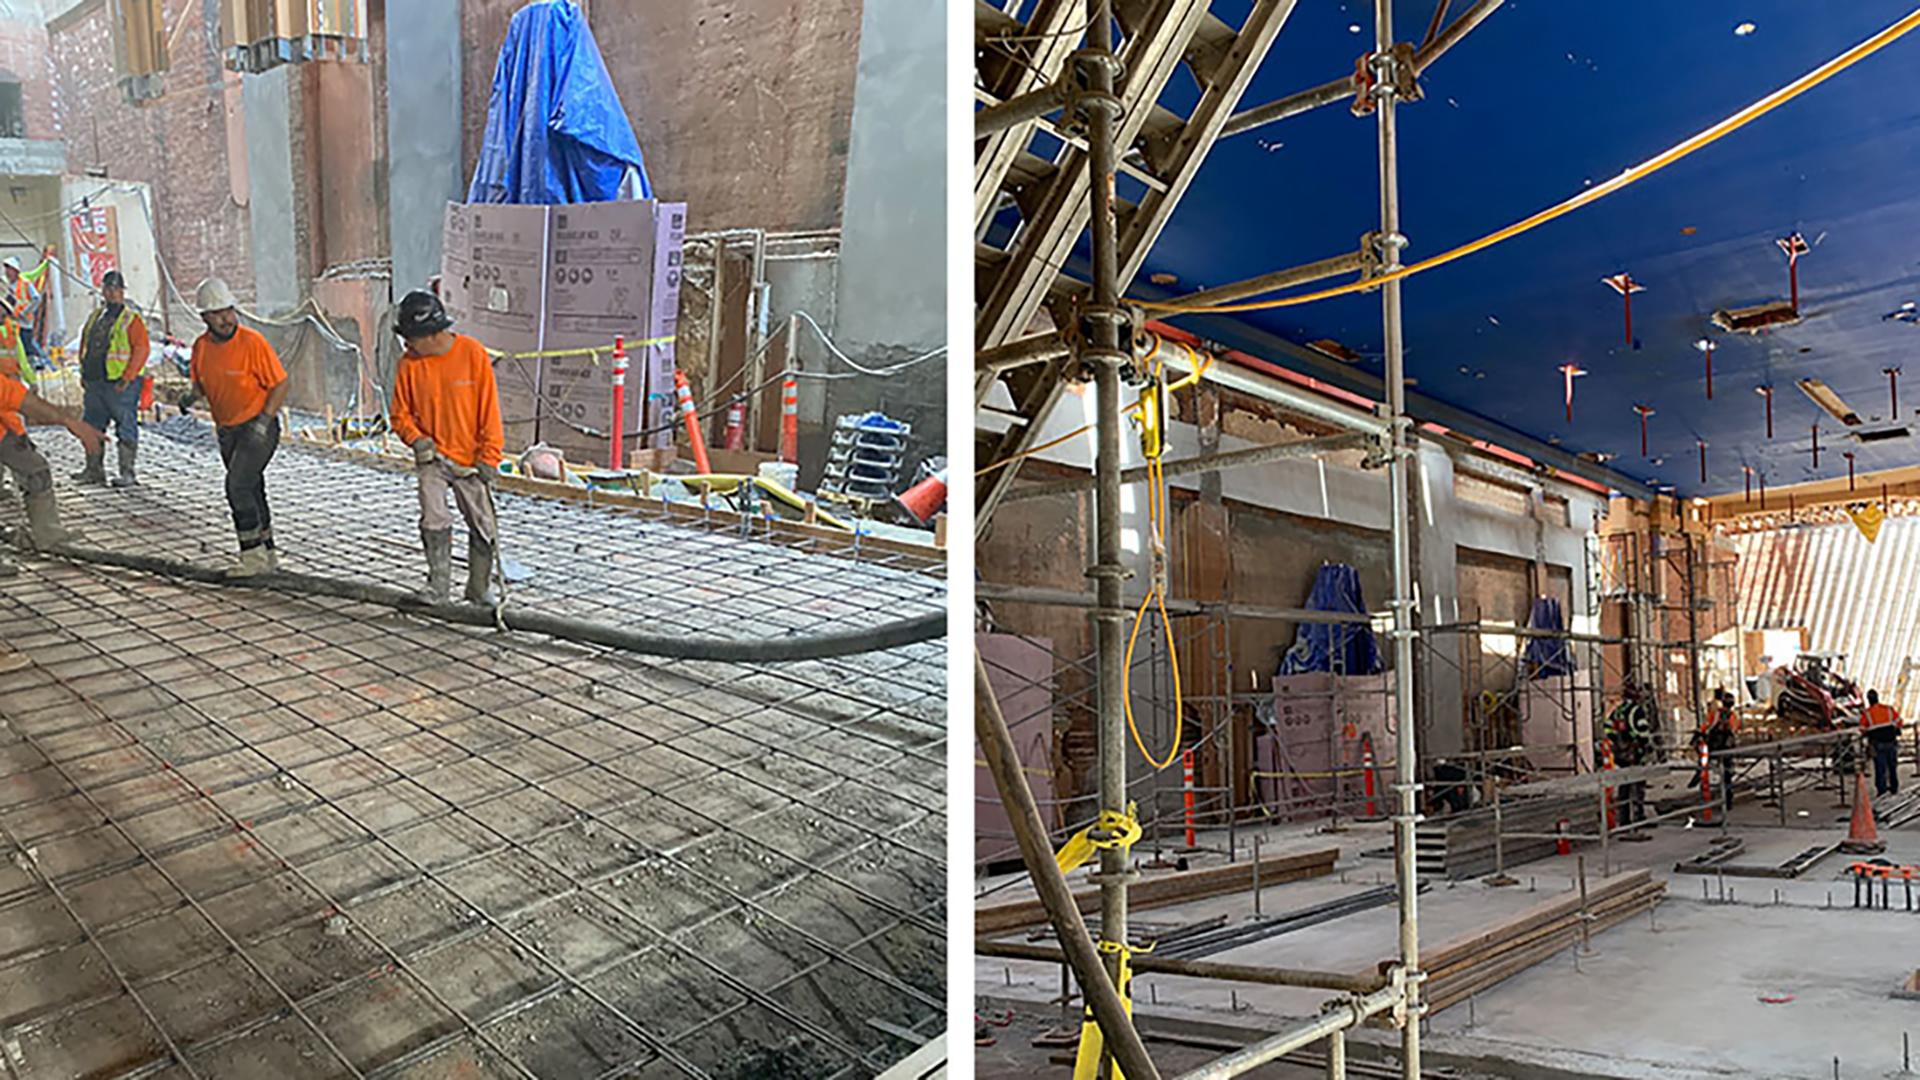 The construction team has recently completed the concrete pour of the venue’s floor and will begin work on other major upgrades.